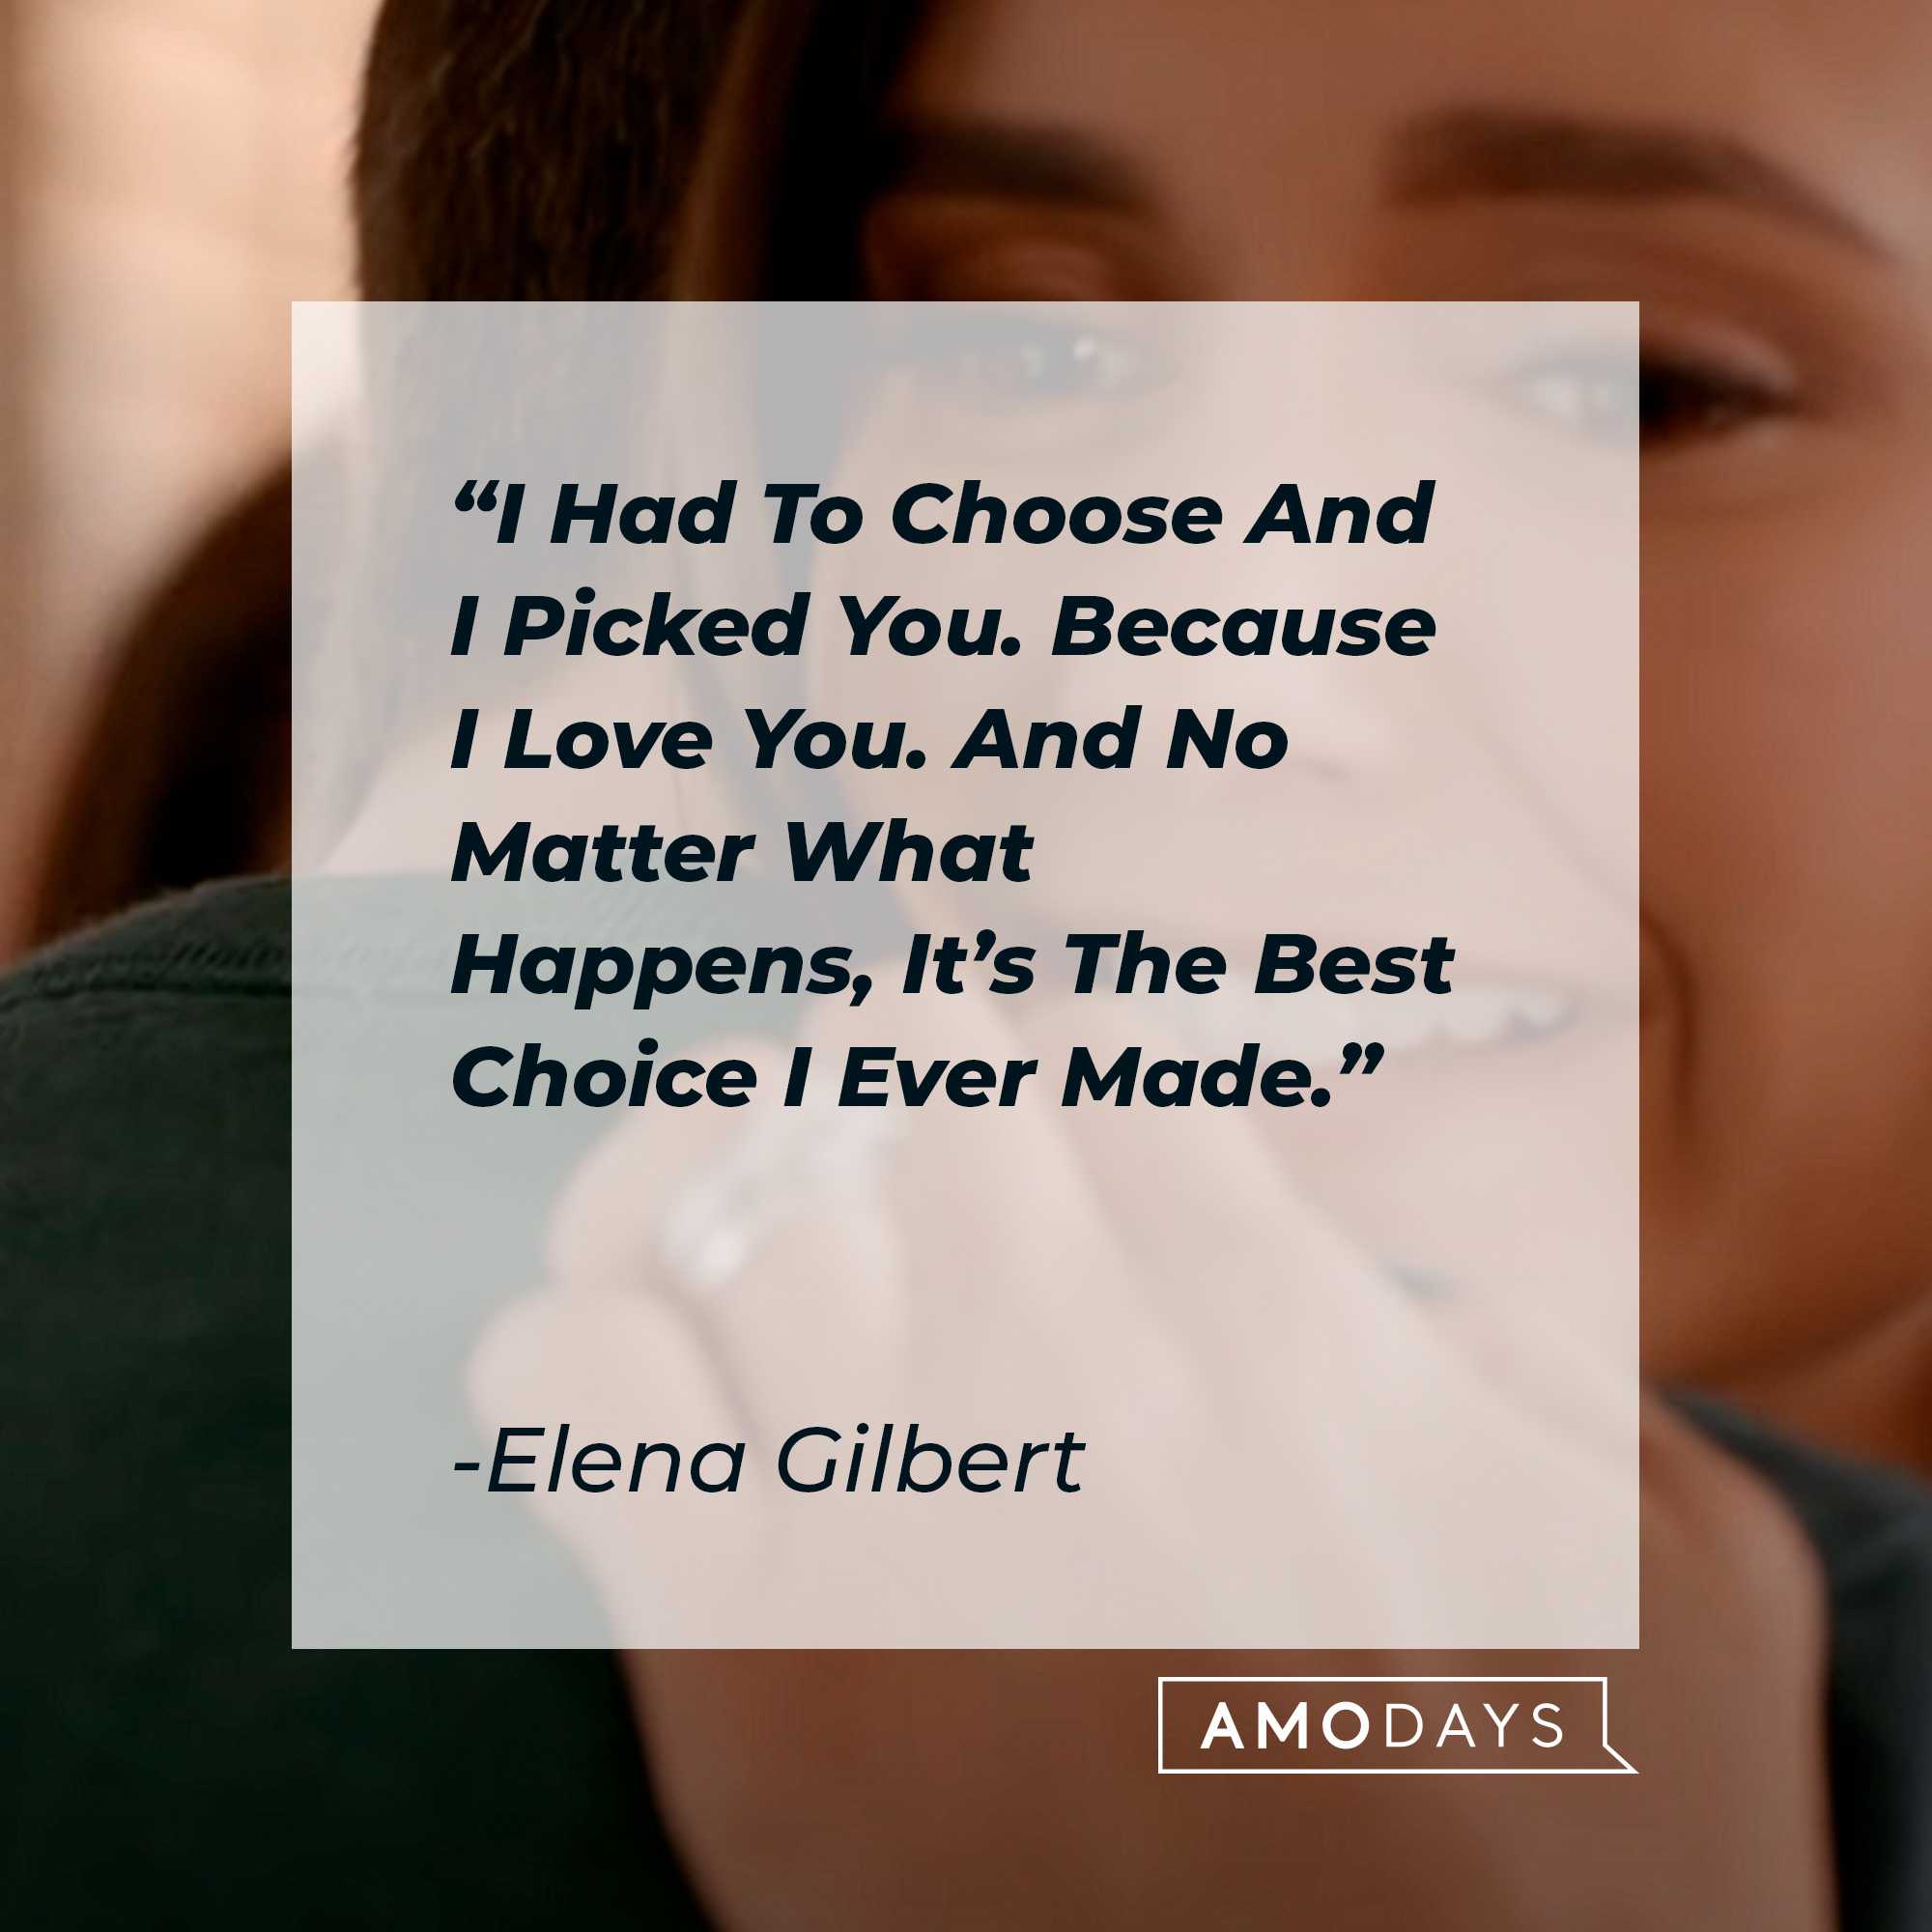 Elena Gilbert's quote: "I Had To Choose And I Picked You. Because I Love You. And No Matter What Happens, It's The Best Choice I Ever Made" | Source: youtube.com/stillwatchingnetflix